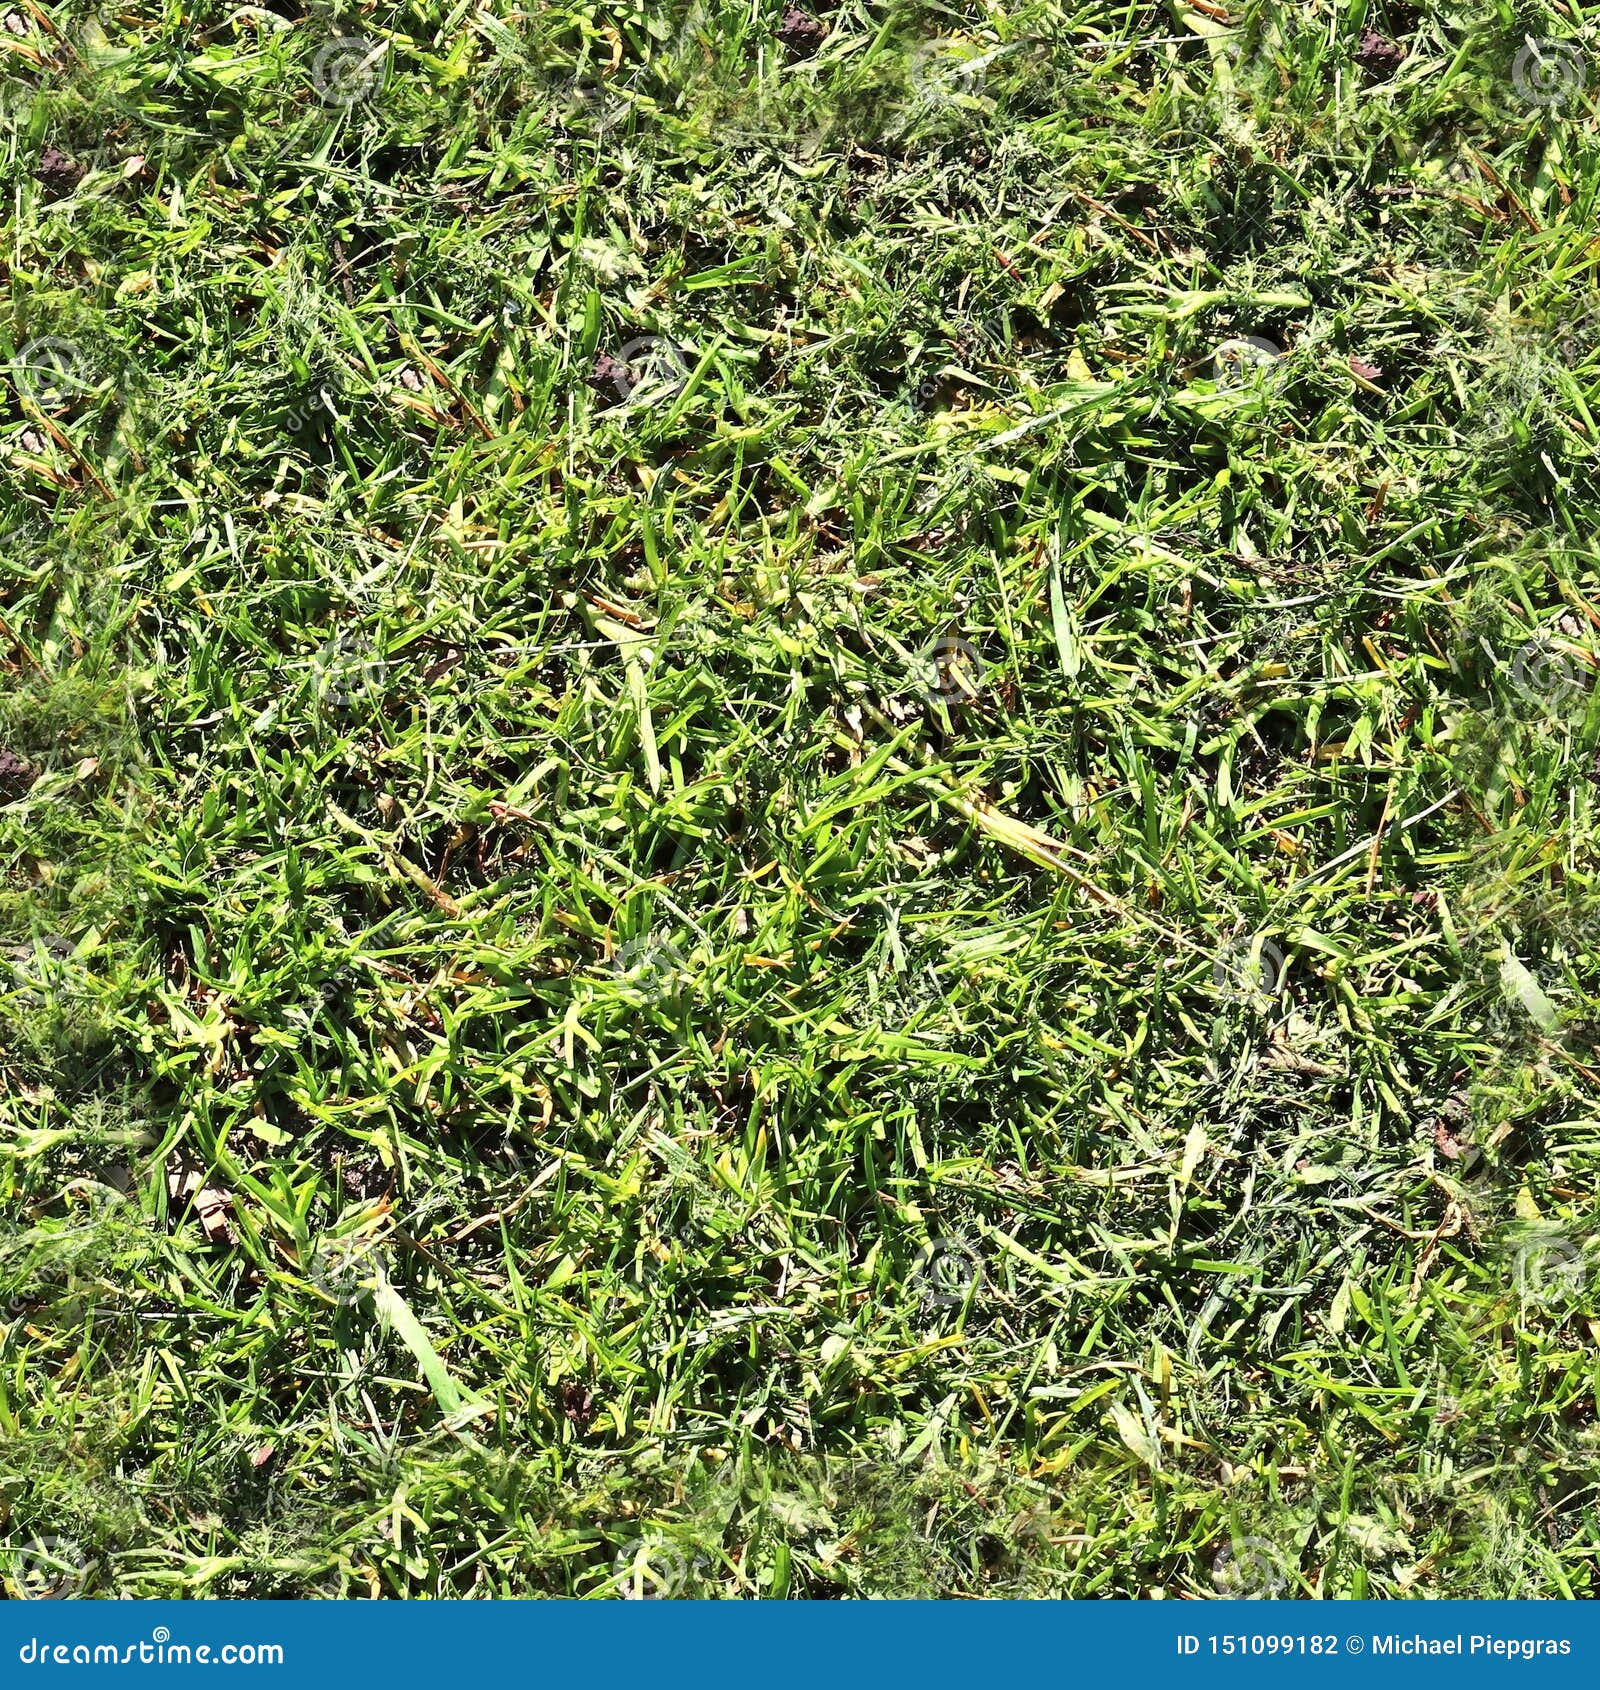 high resolution seemless texture of green grass and plants for 3d modelling with more than 6 megapixel in size